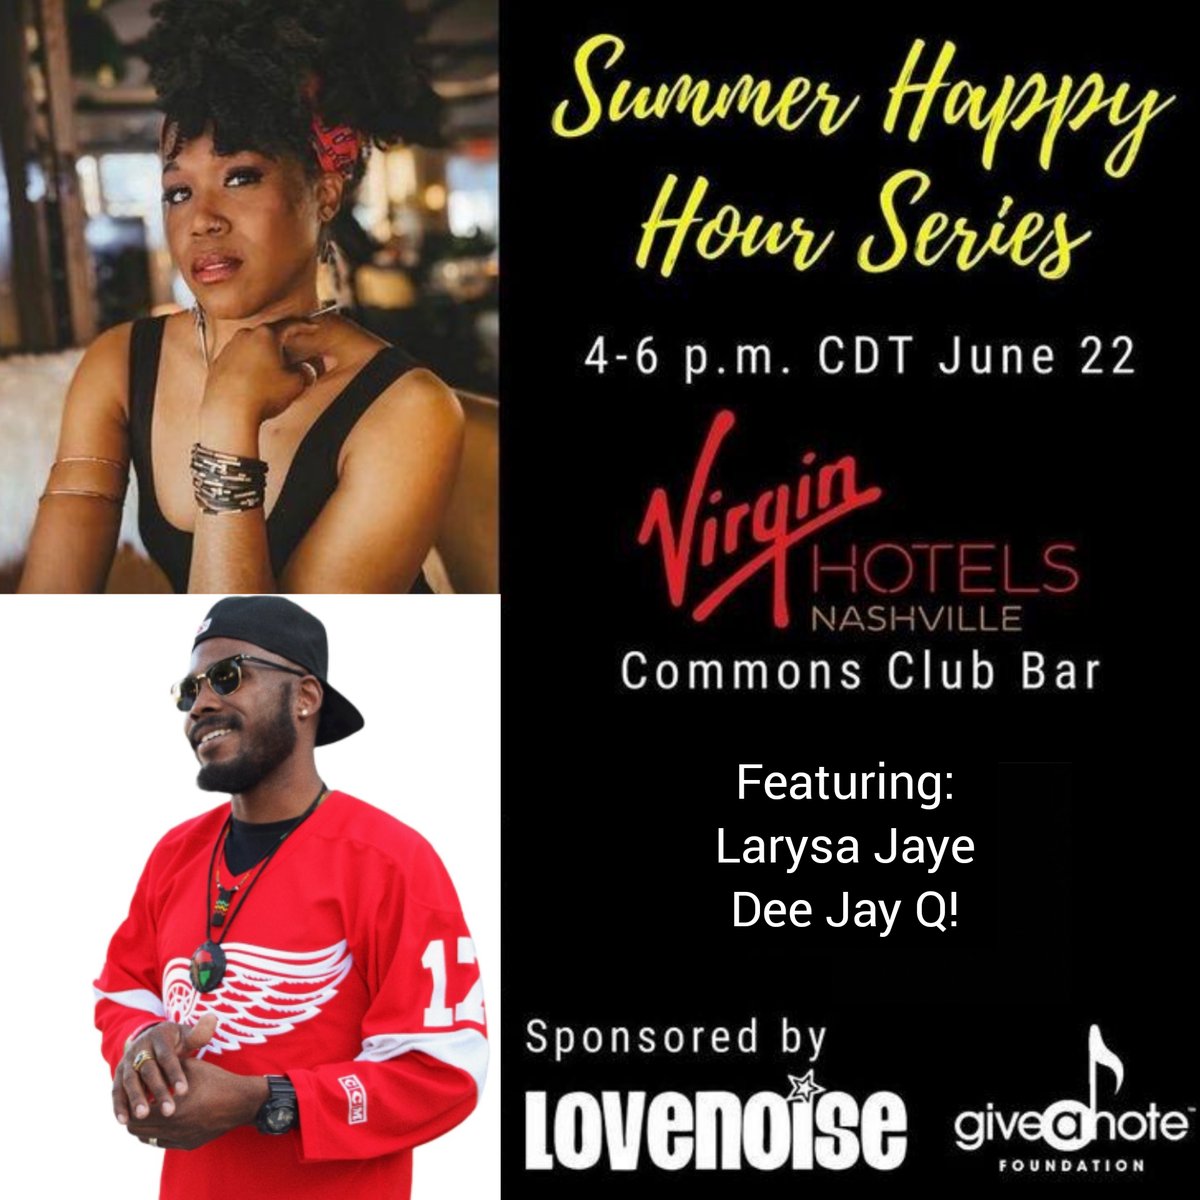 We’re excited to host the Summer Happy Hour Series with @virginhotelsNSH! These FREE events kick off June 22 with Larysa Jaye and Dee Jay Q. 

Thanks to @lovenoise for sponsoring the first event!

More info and to register: https://t.co/NdOT1oI7rb

#MusicEdMatters https://t.co/DGYc1AuC8i